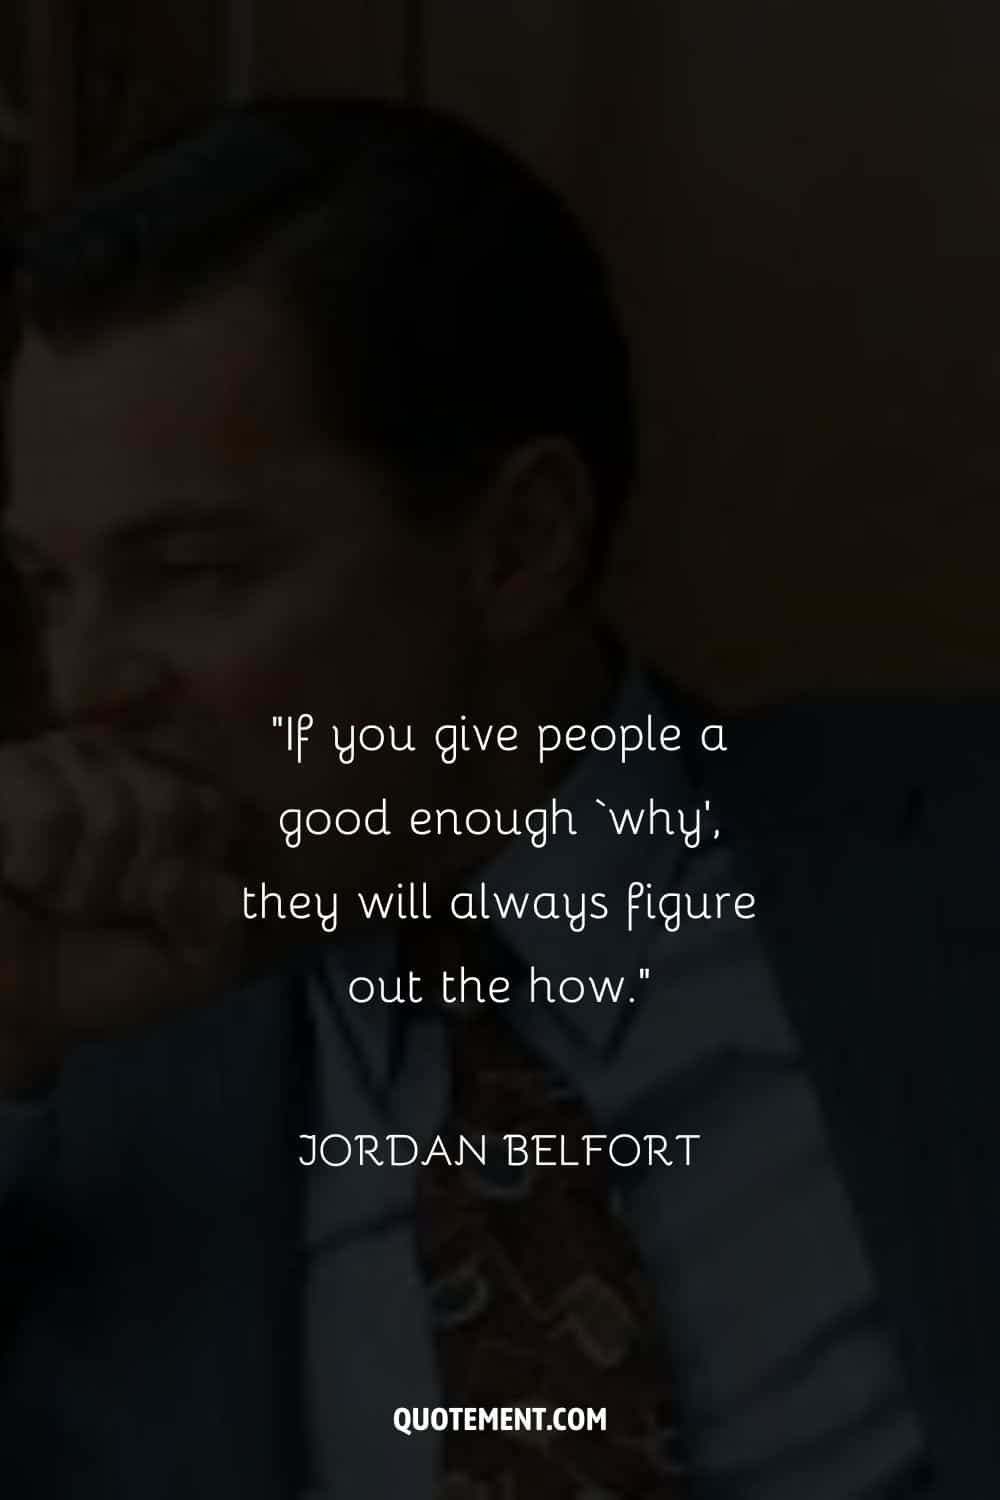 A glimpse into Jordan Belfort's unwavering ambition representing wolf of wall st quote
